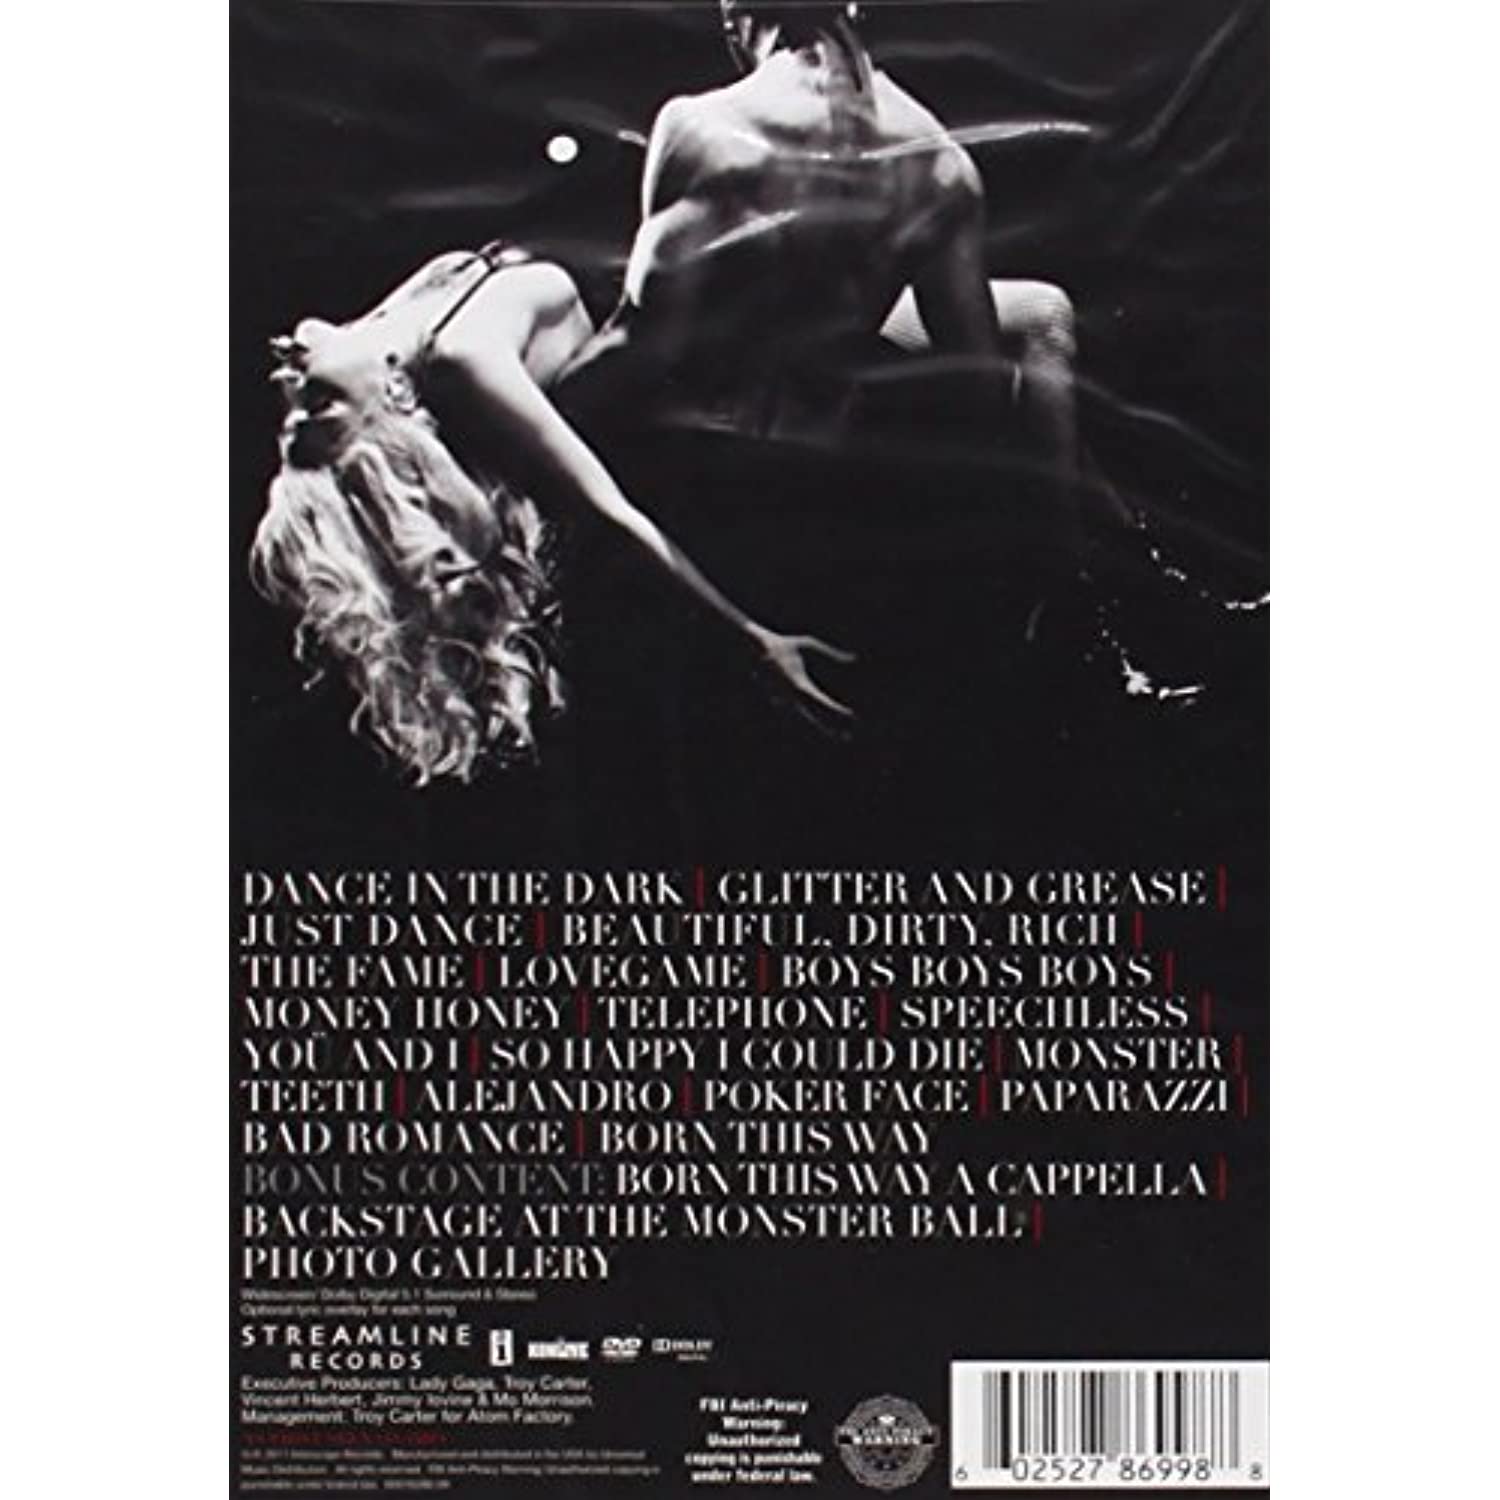 The Monster Ball Tour at Madison Square Garden (DVD) - image 2 of 2